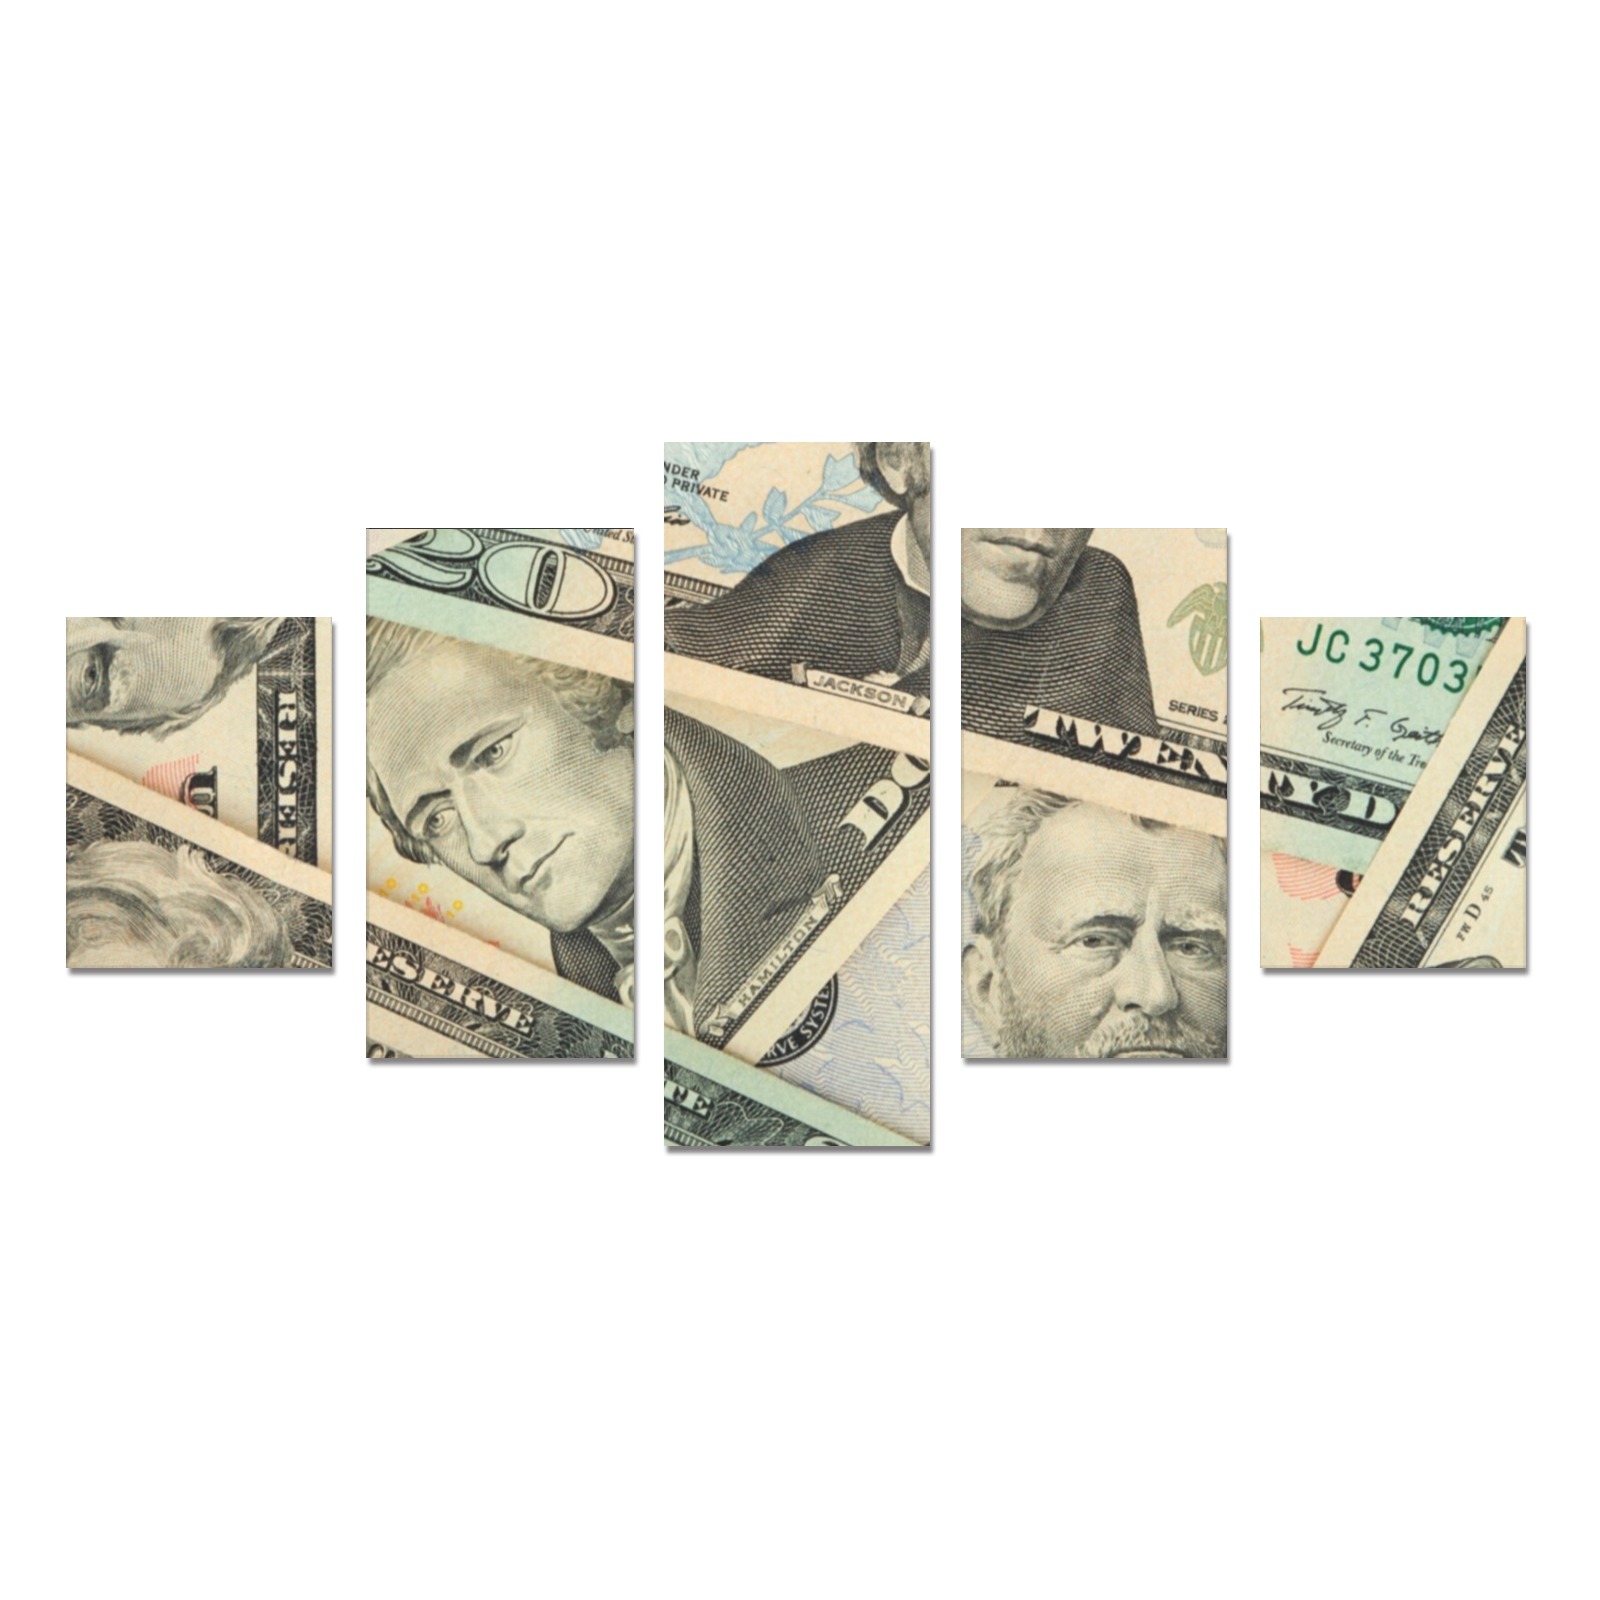 US PAPER CURRENCY Canvas Print Sets B (No Frame)